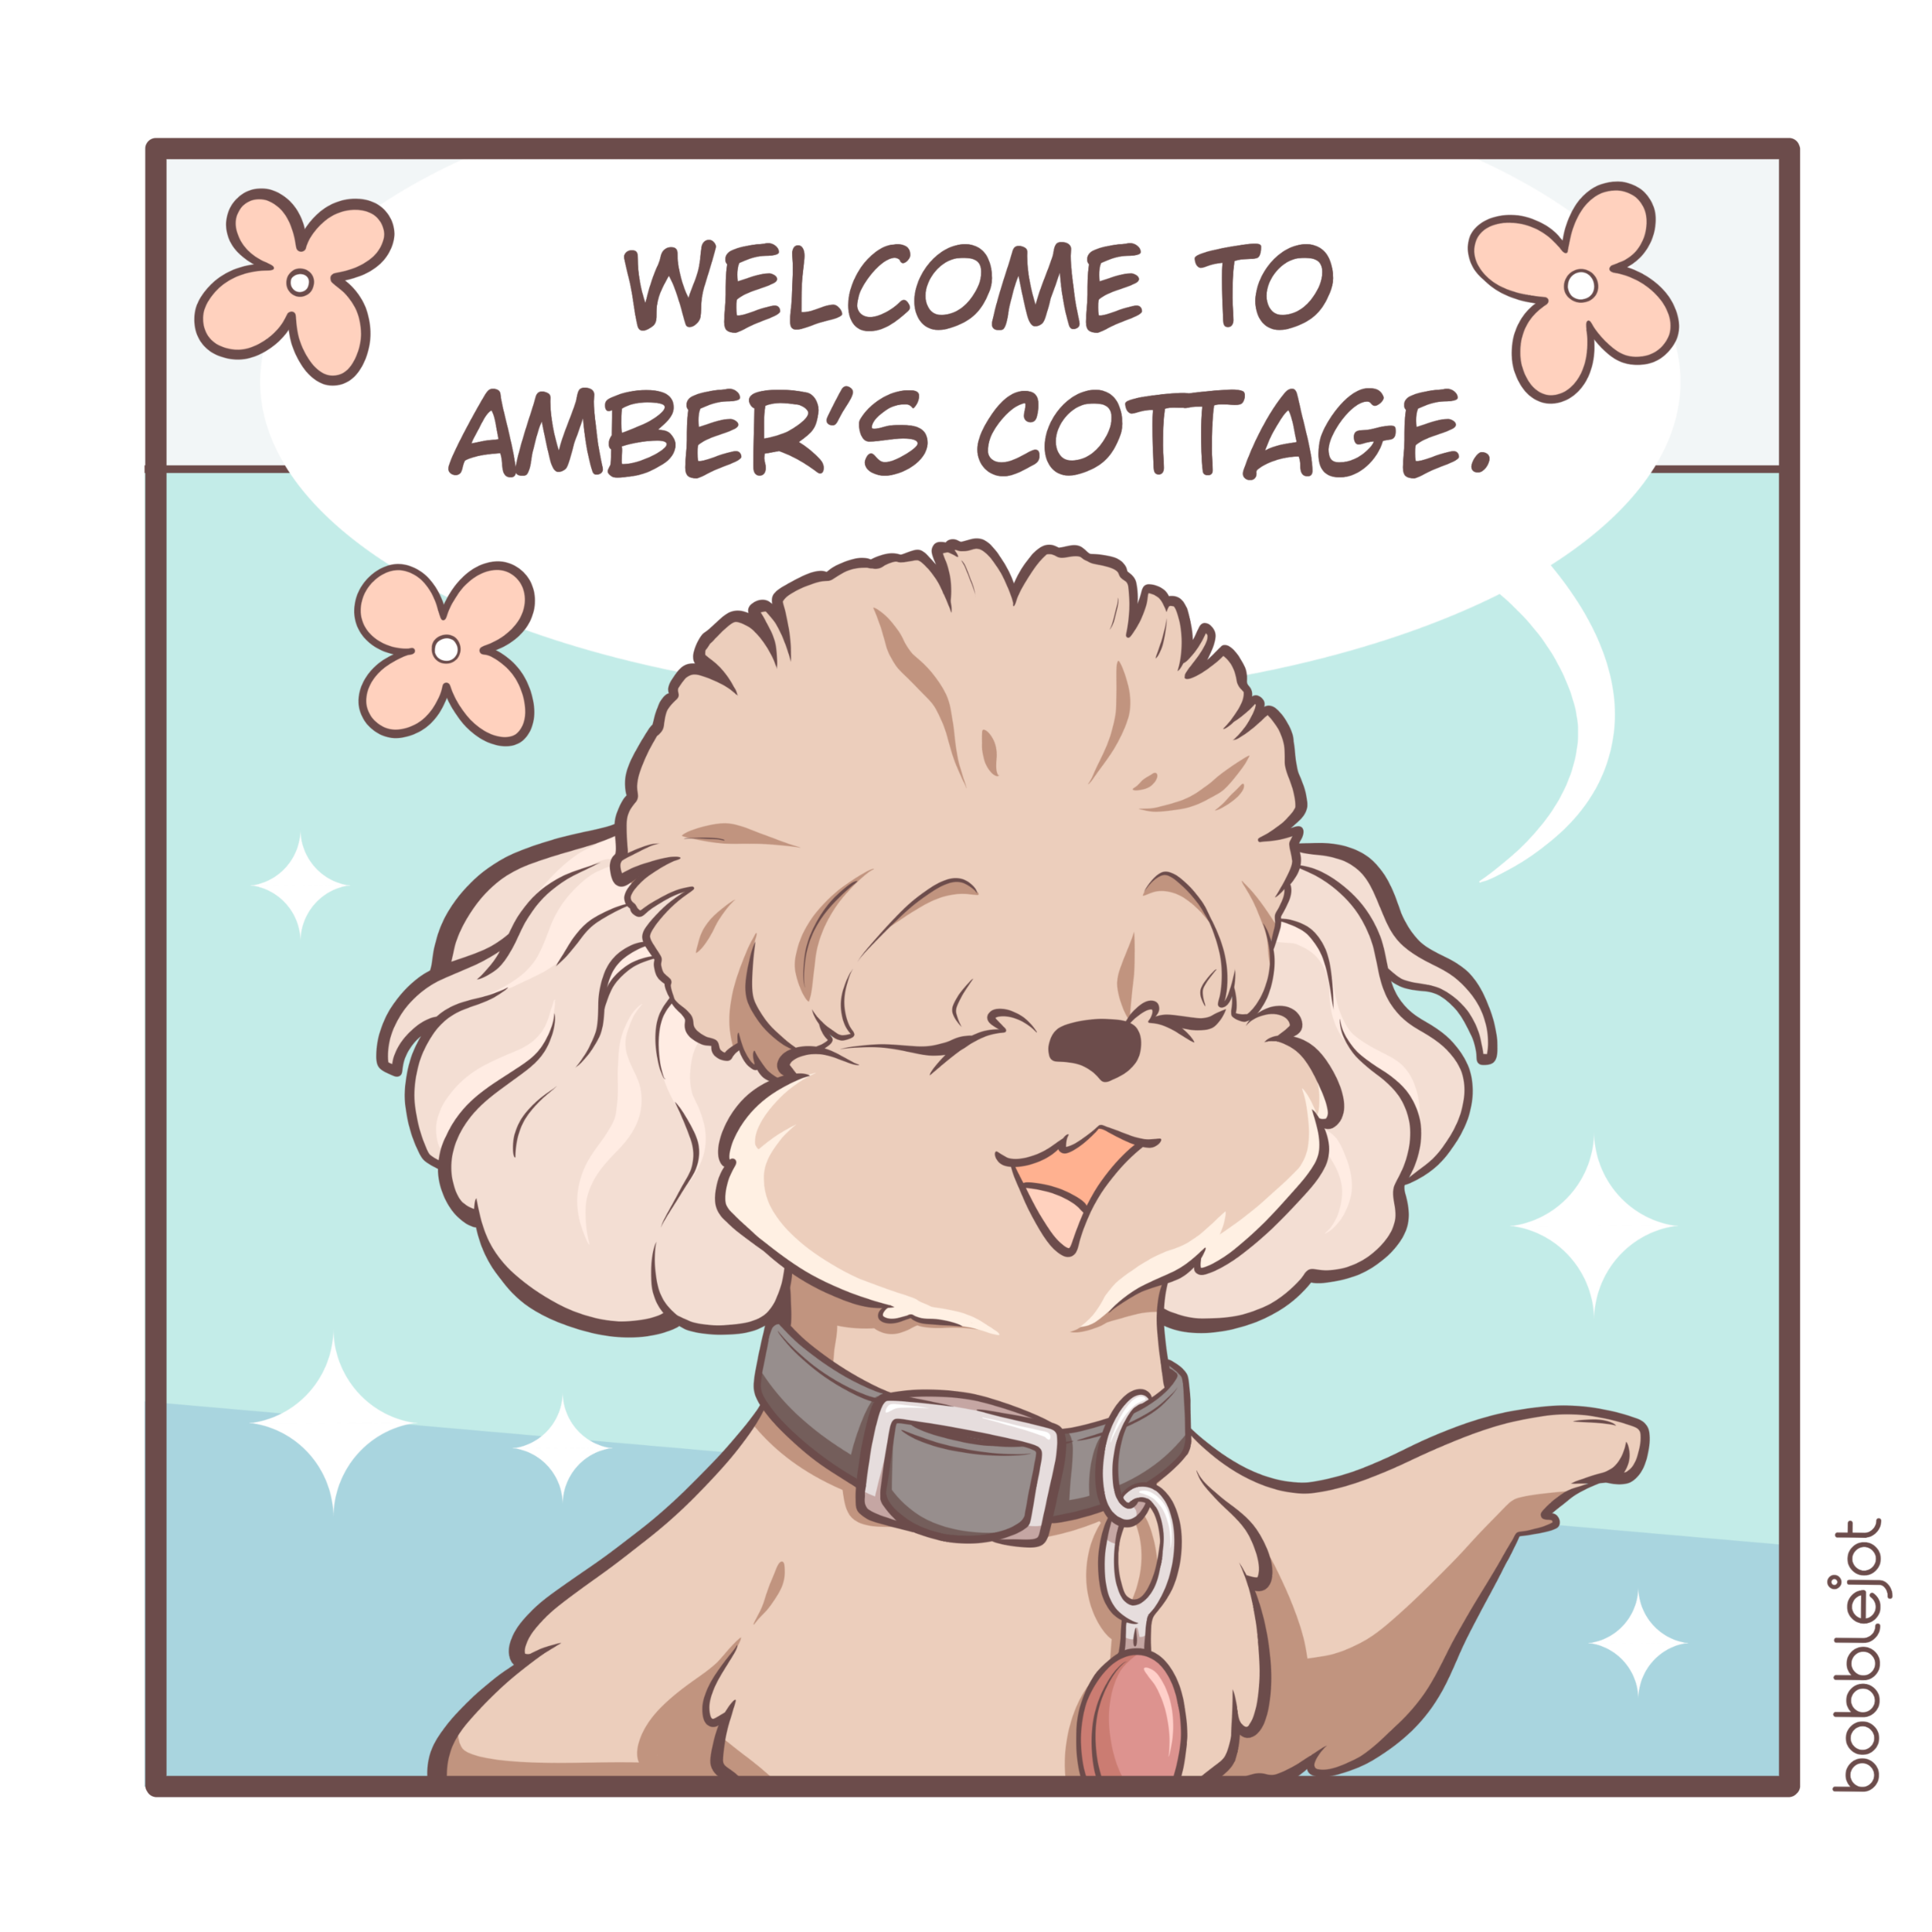 AmbersCottage_Page1.PNG